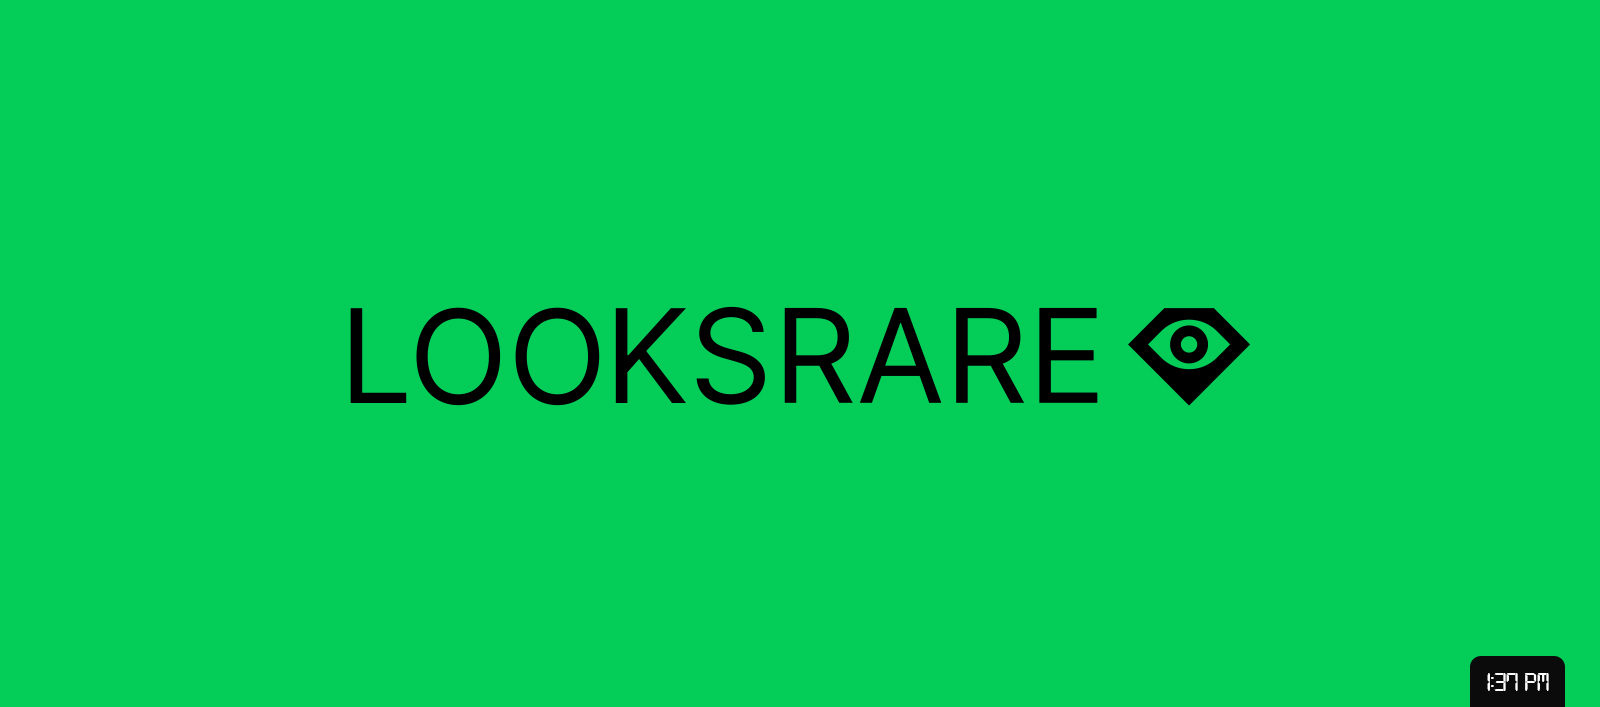 LooksRare (LOOKS) Price Prediction For 2022